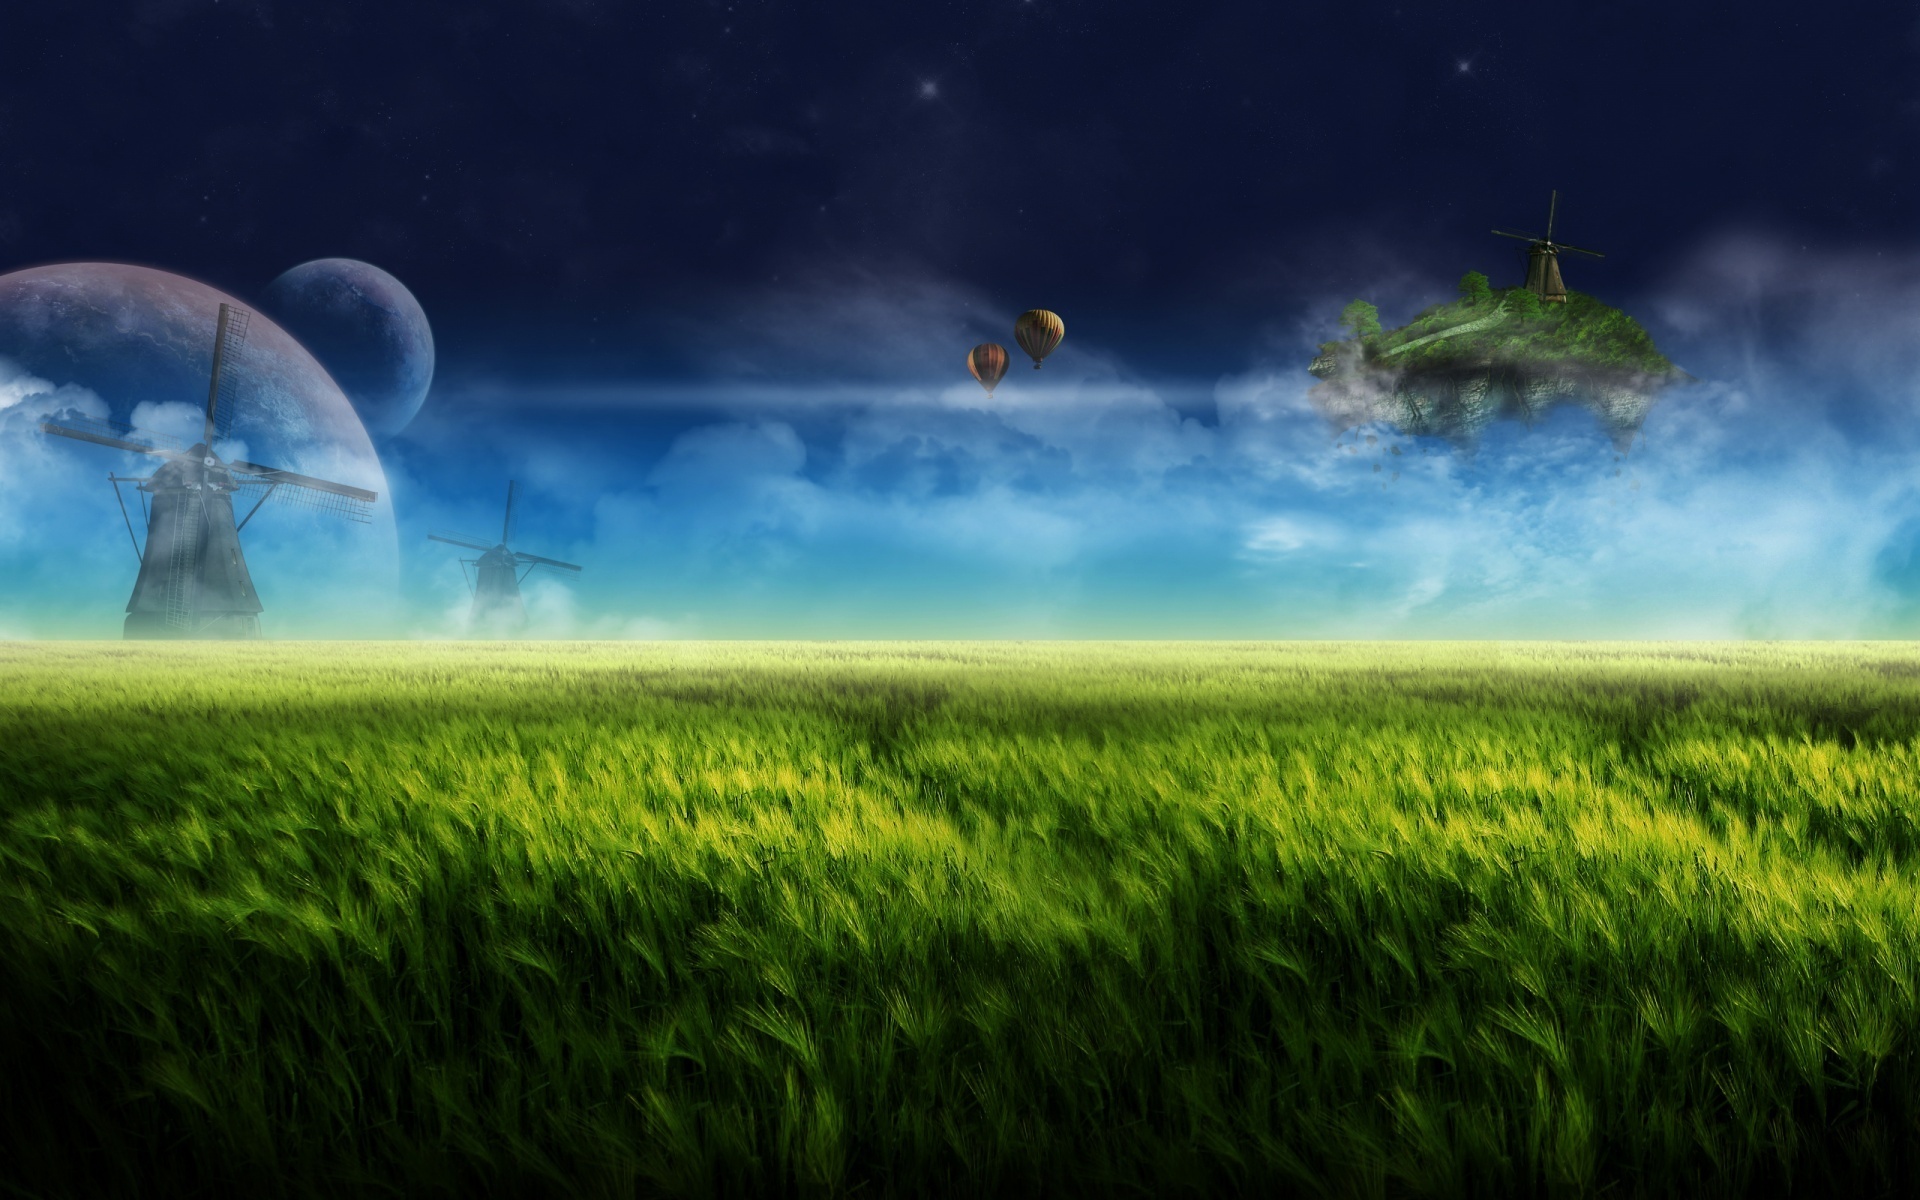 Your Imaginary World Image HD Wallpaper